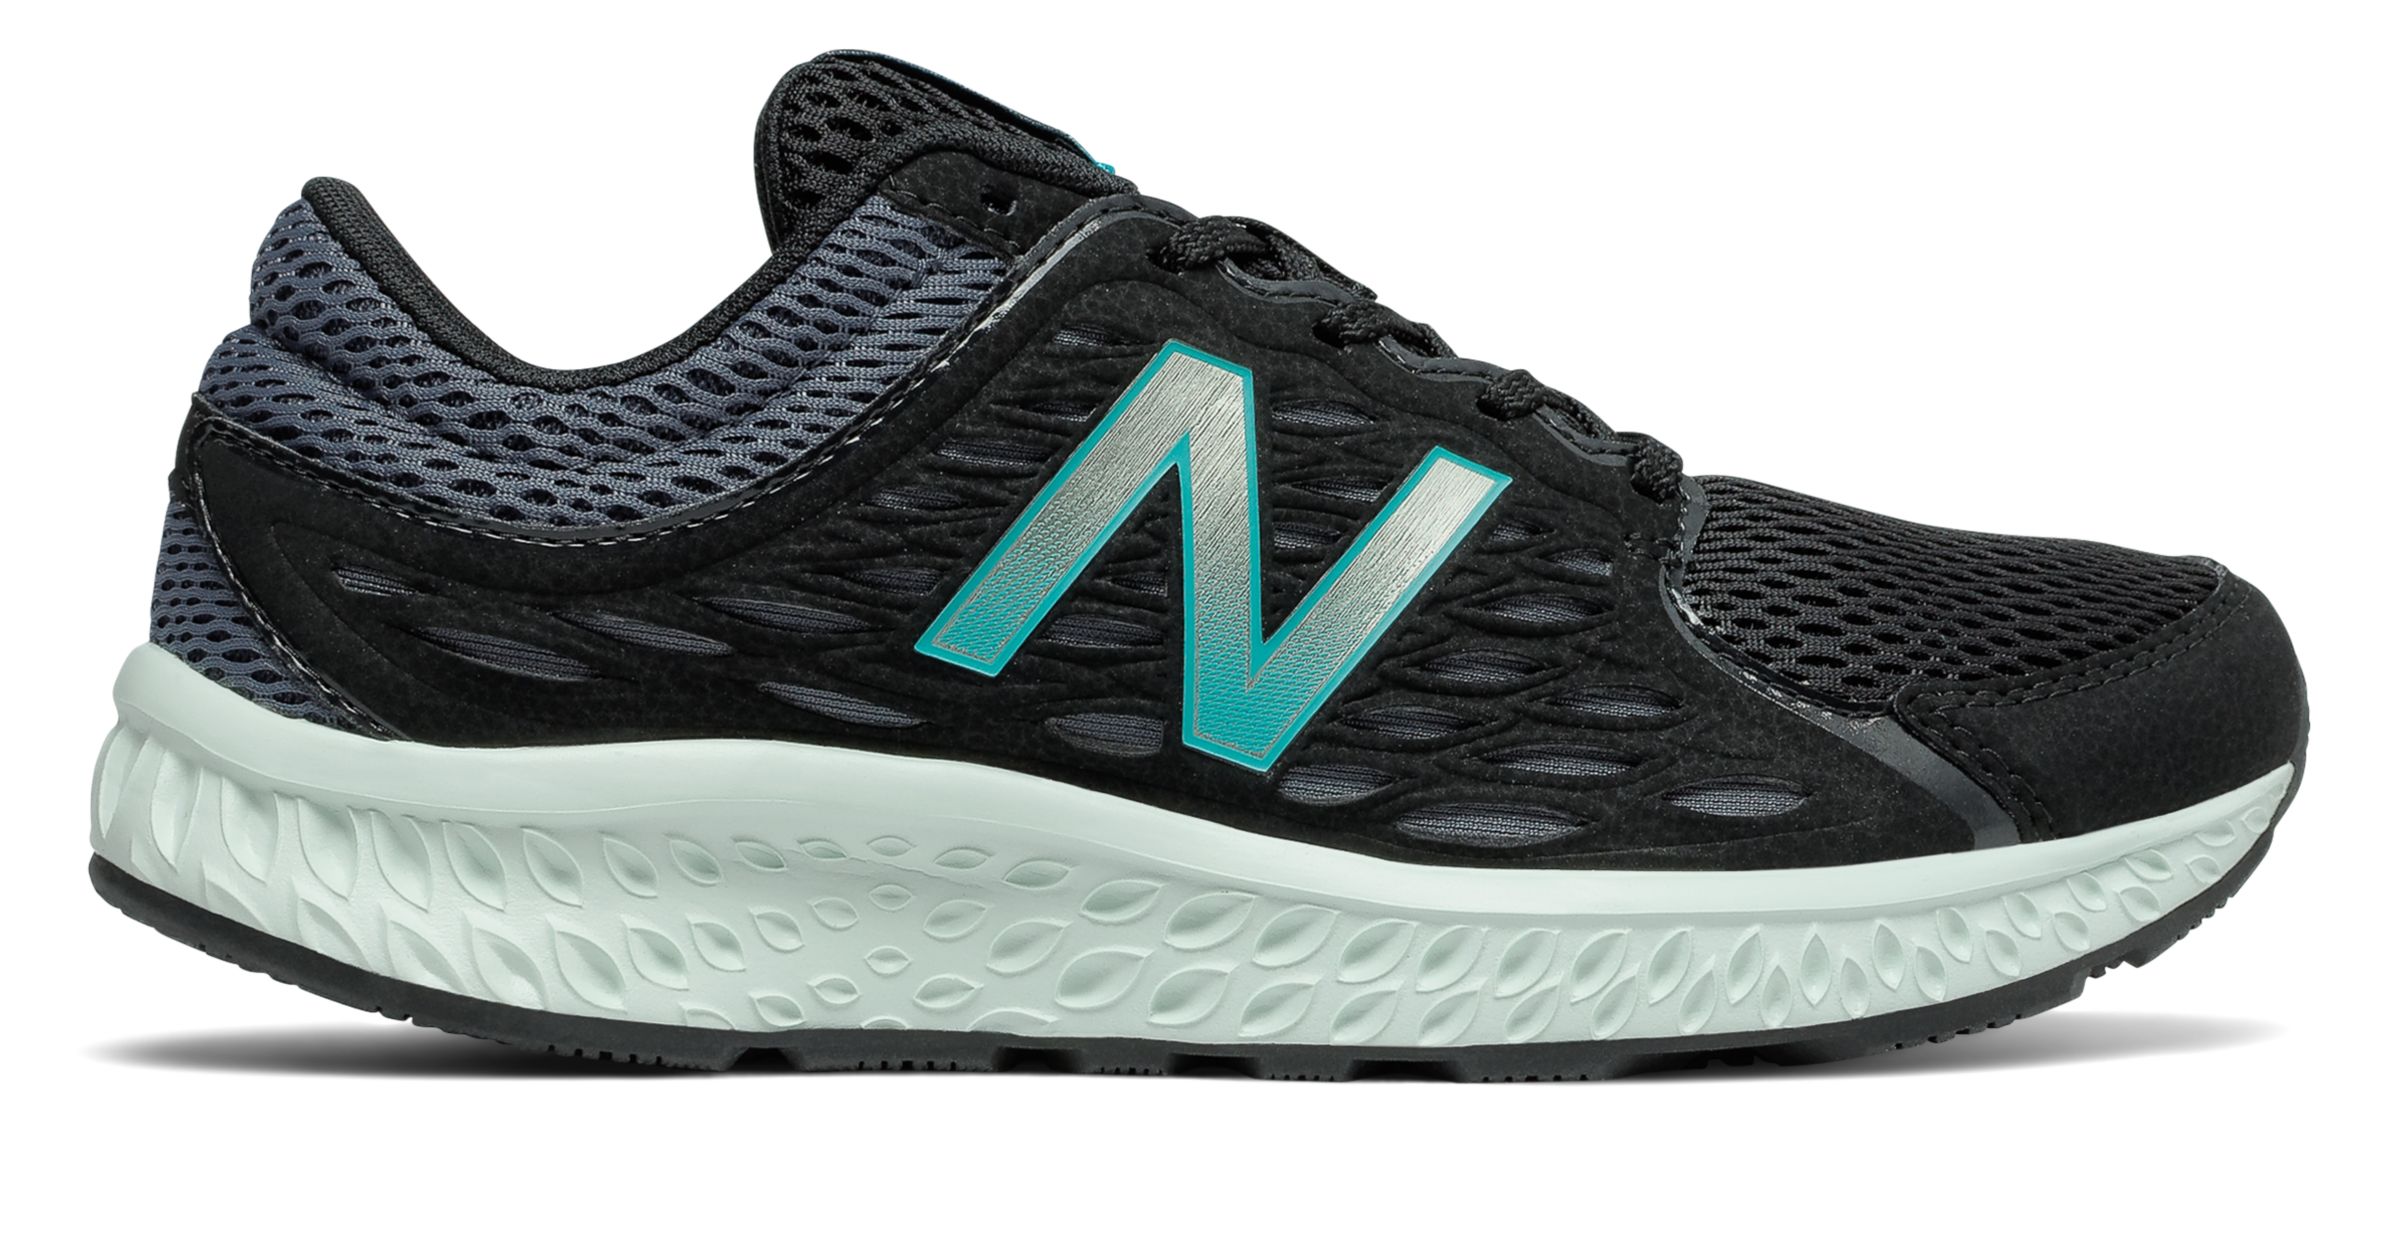 New Balance W420-V3 on Sale - Discounts Up to 40% Off on W420CK3 at Joe's New  Balance Outlet